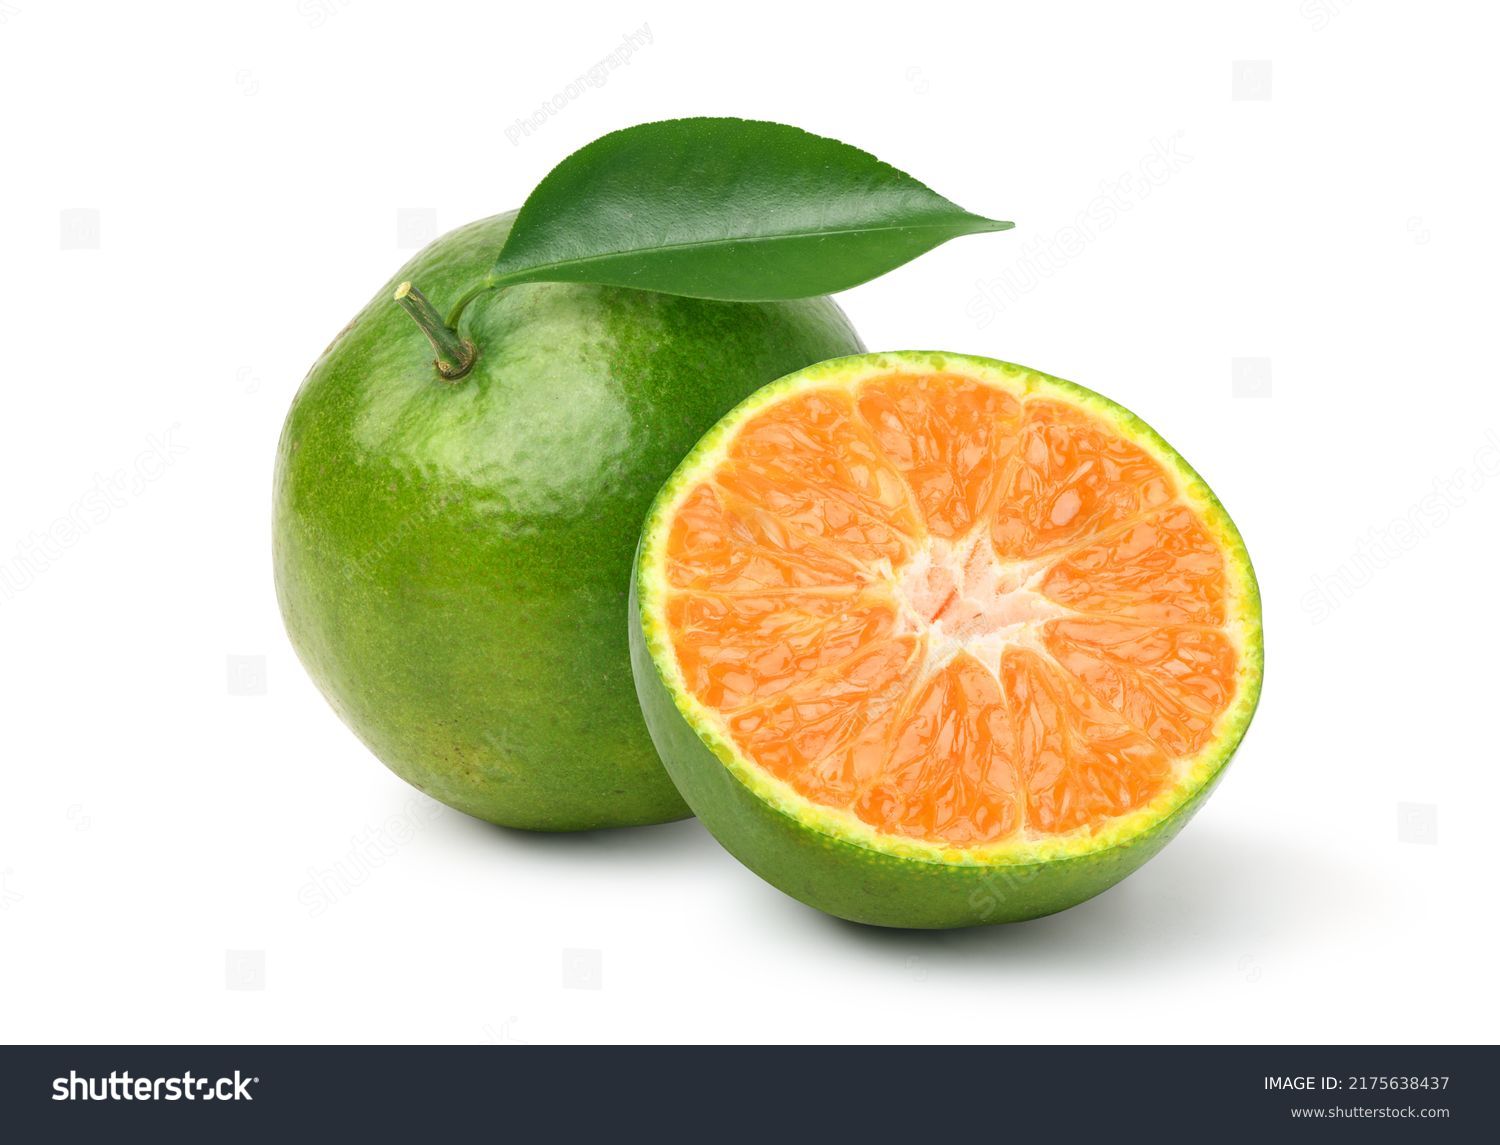 Tangerine orange with cut in half isolated on white background. Clipping path. #2175638437